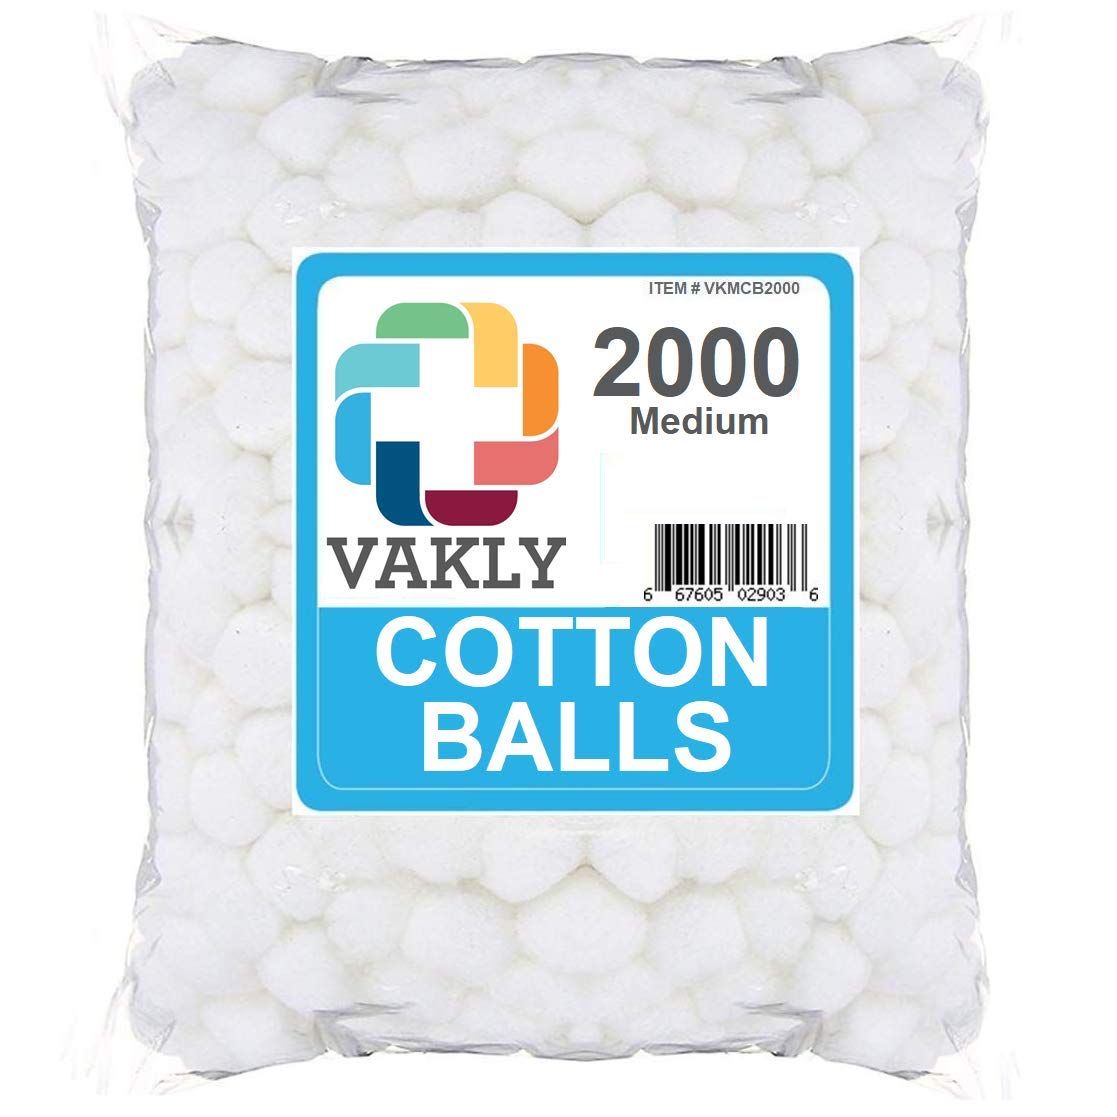  Dukal Cotton Balls. Pack of 1000 Large cotton balls for wound  care. Soft and absorbent, 100% cotton. Non-sterile cotton. Soft, white,  single use, latex-free. : Beauty & Personal Care